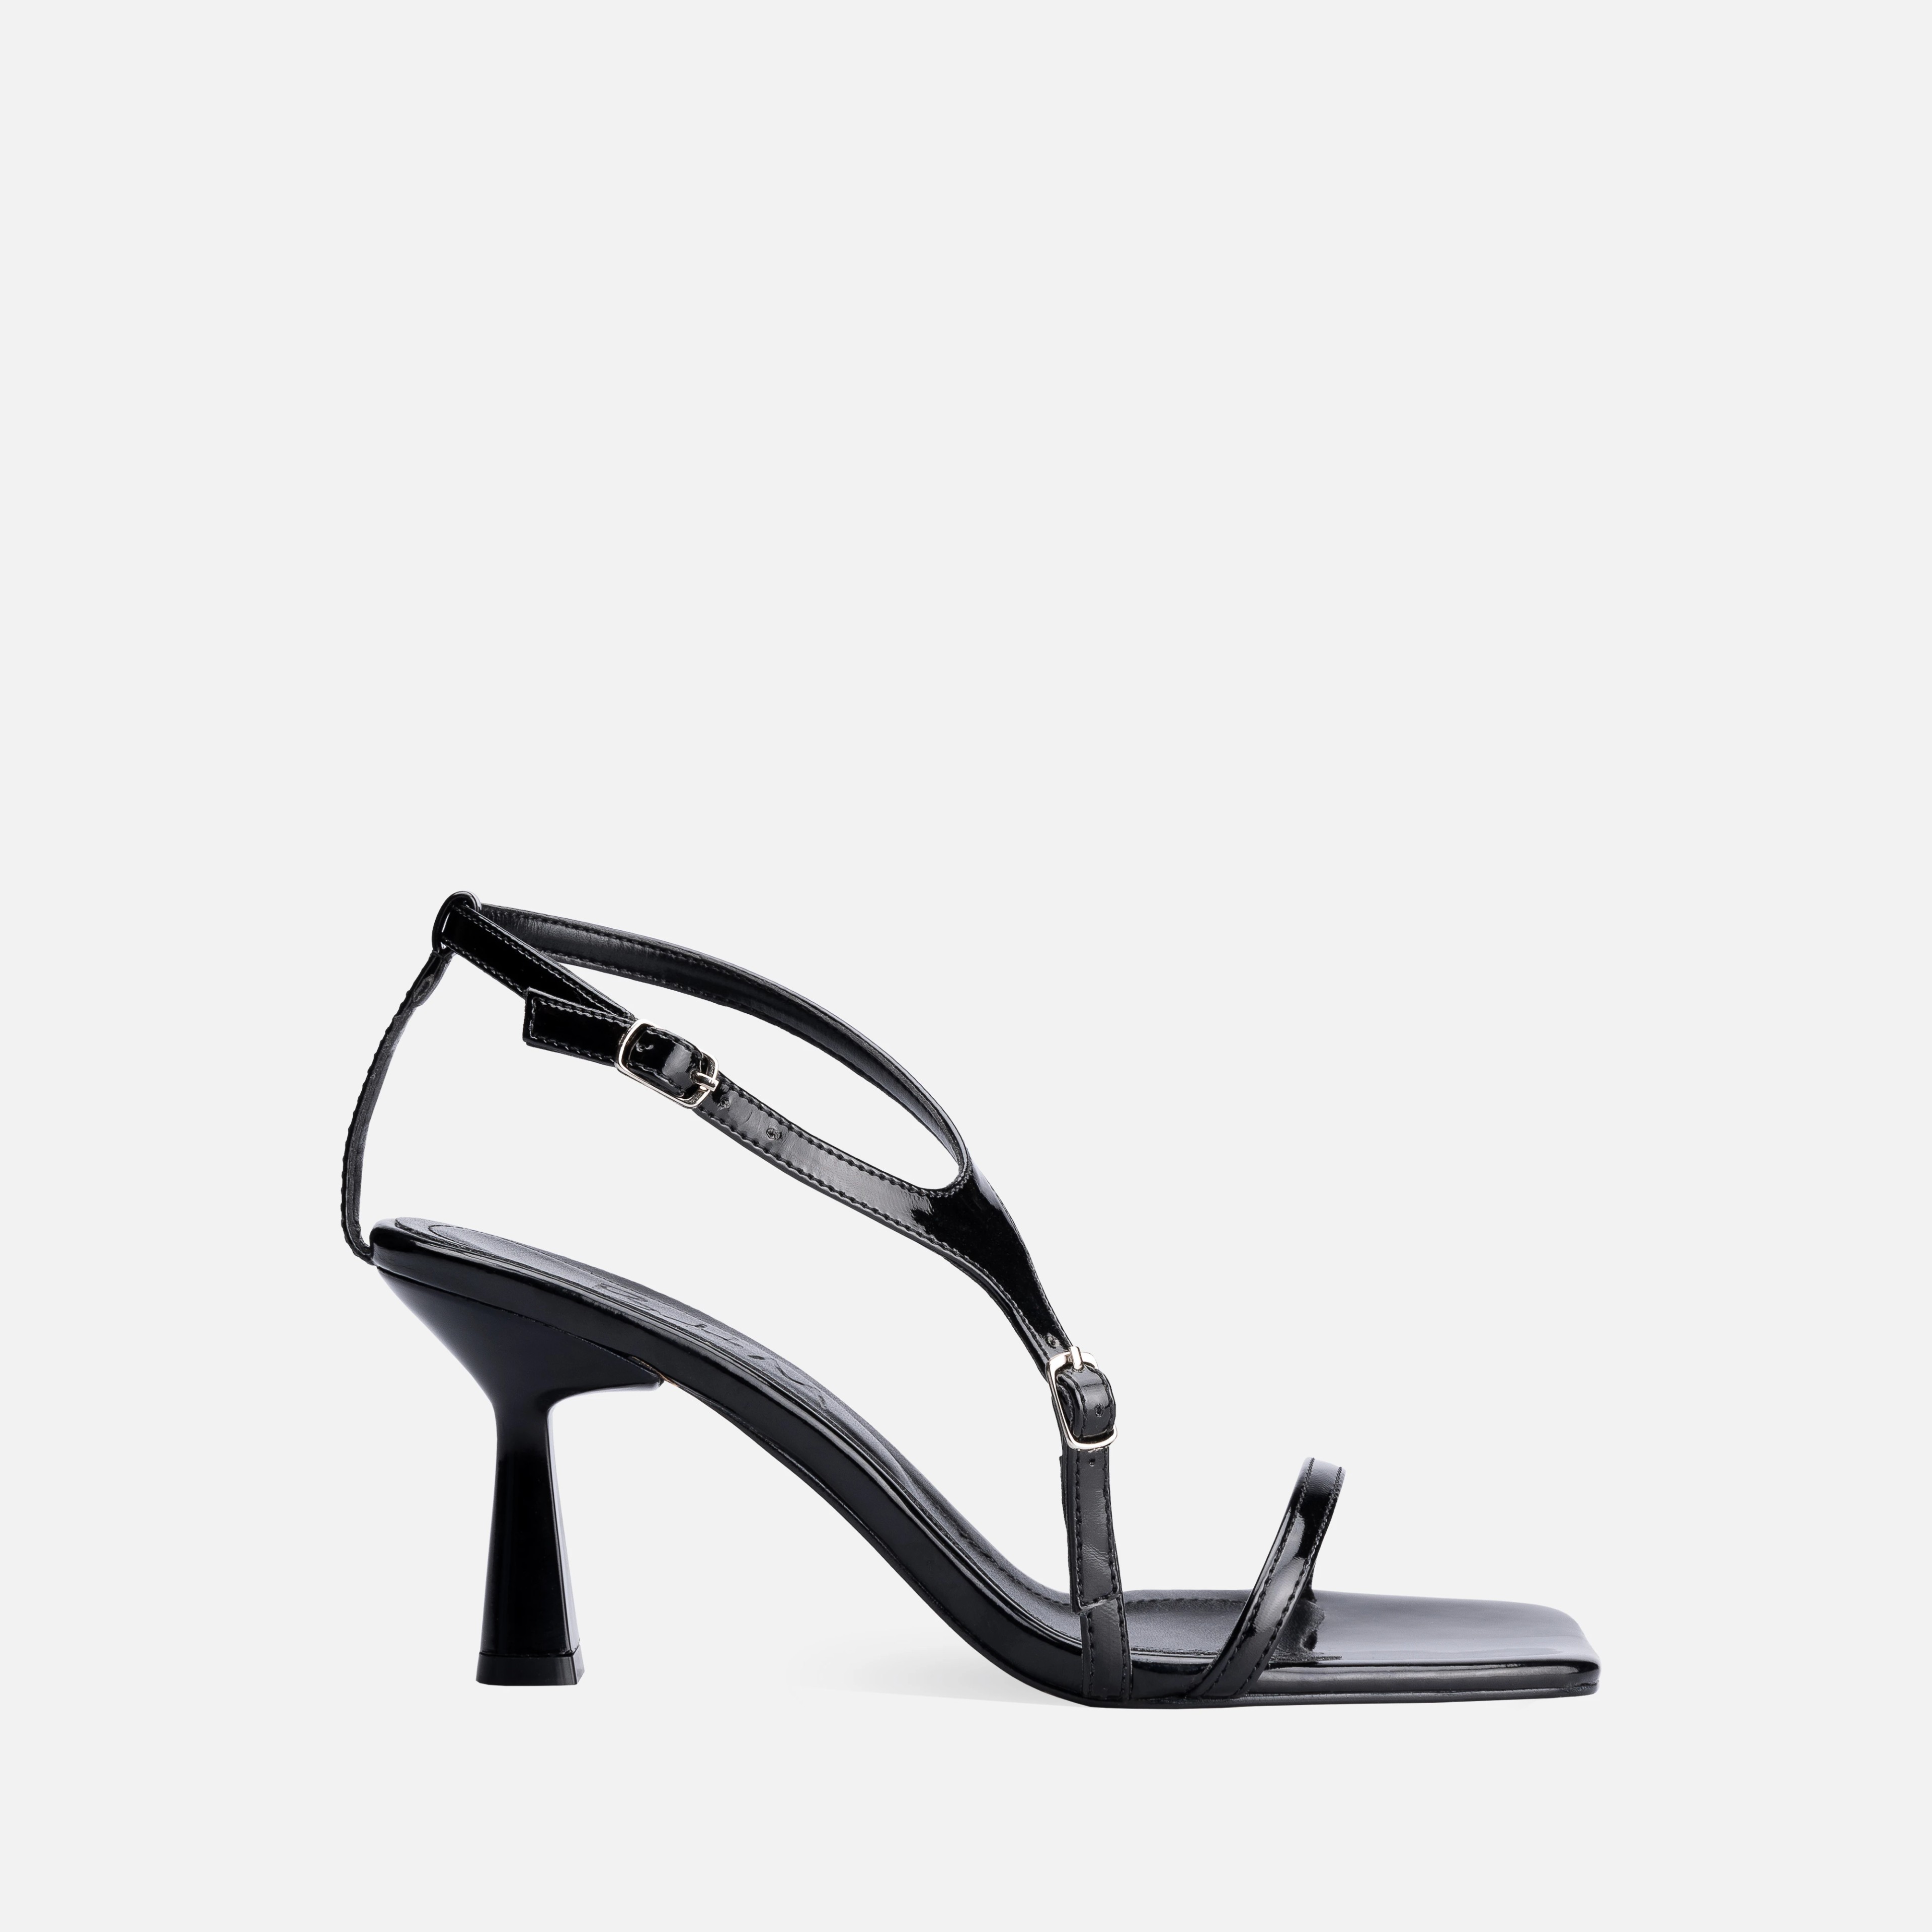 Patent Leather Thin High-Heeled Shoes - Black